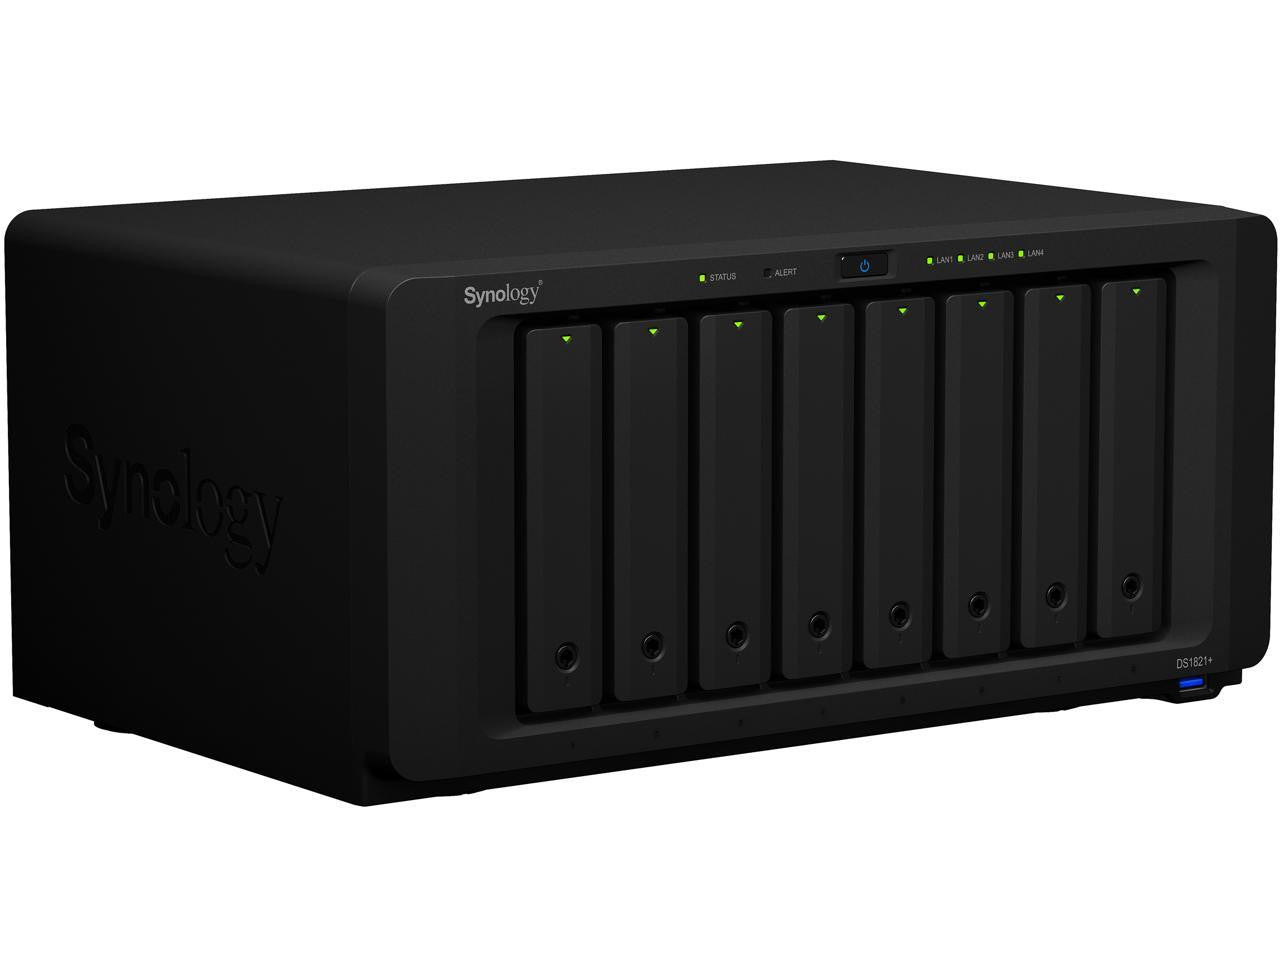 Synology DS1821+ 8-BAY DiskStation with 32GB RAM, 800GB (2x400GB) Cache, E10G21-F2 SFP+ 10Gb Adapter and 96TB (8 x 12TB) of Synology Enterprise HAT5300 Drives Fully Assembled and Tested